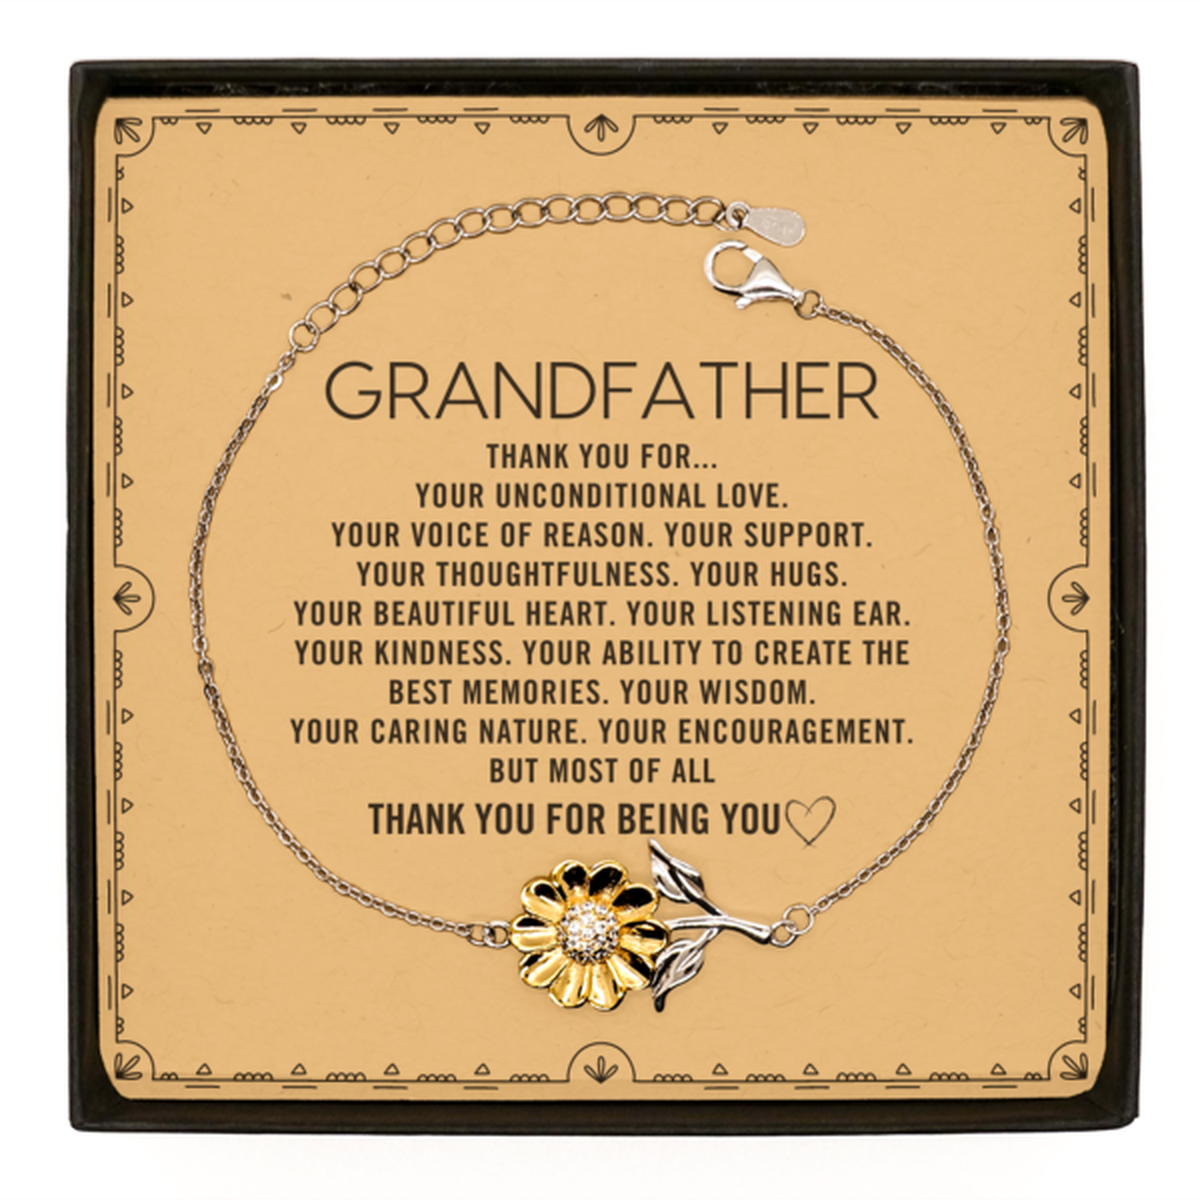 Grandfather Sunflower Bracelet Custom, Message Card Gifts For Grandfather Christmas Graduation Birthday Gifts for Men Women Grandfather Thank you for Your unconditional love